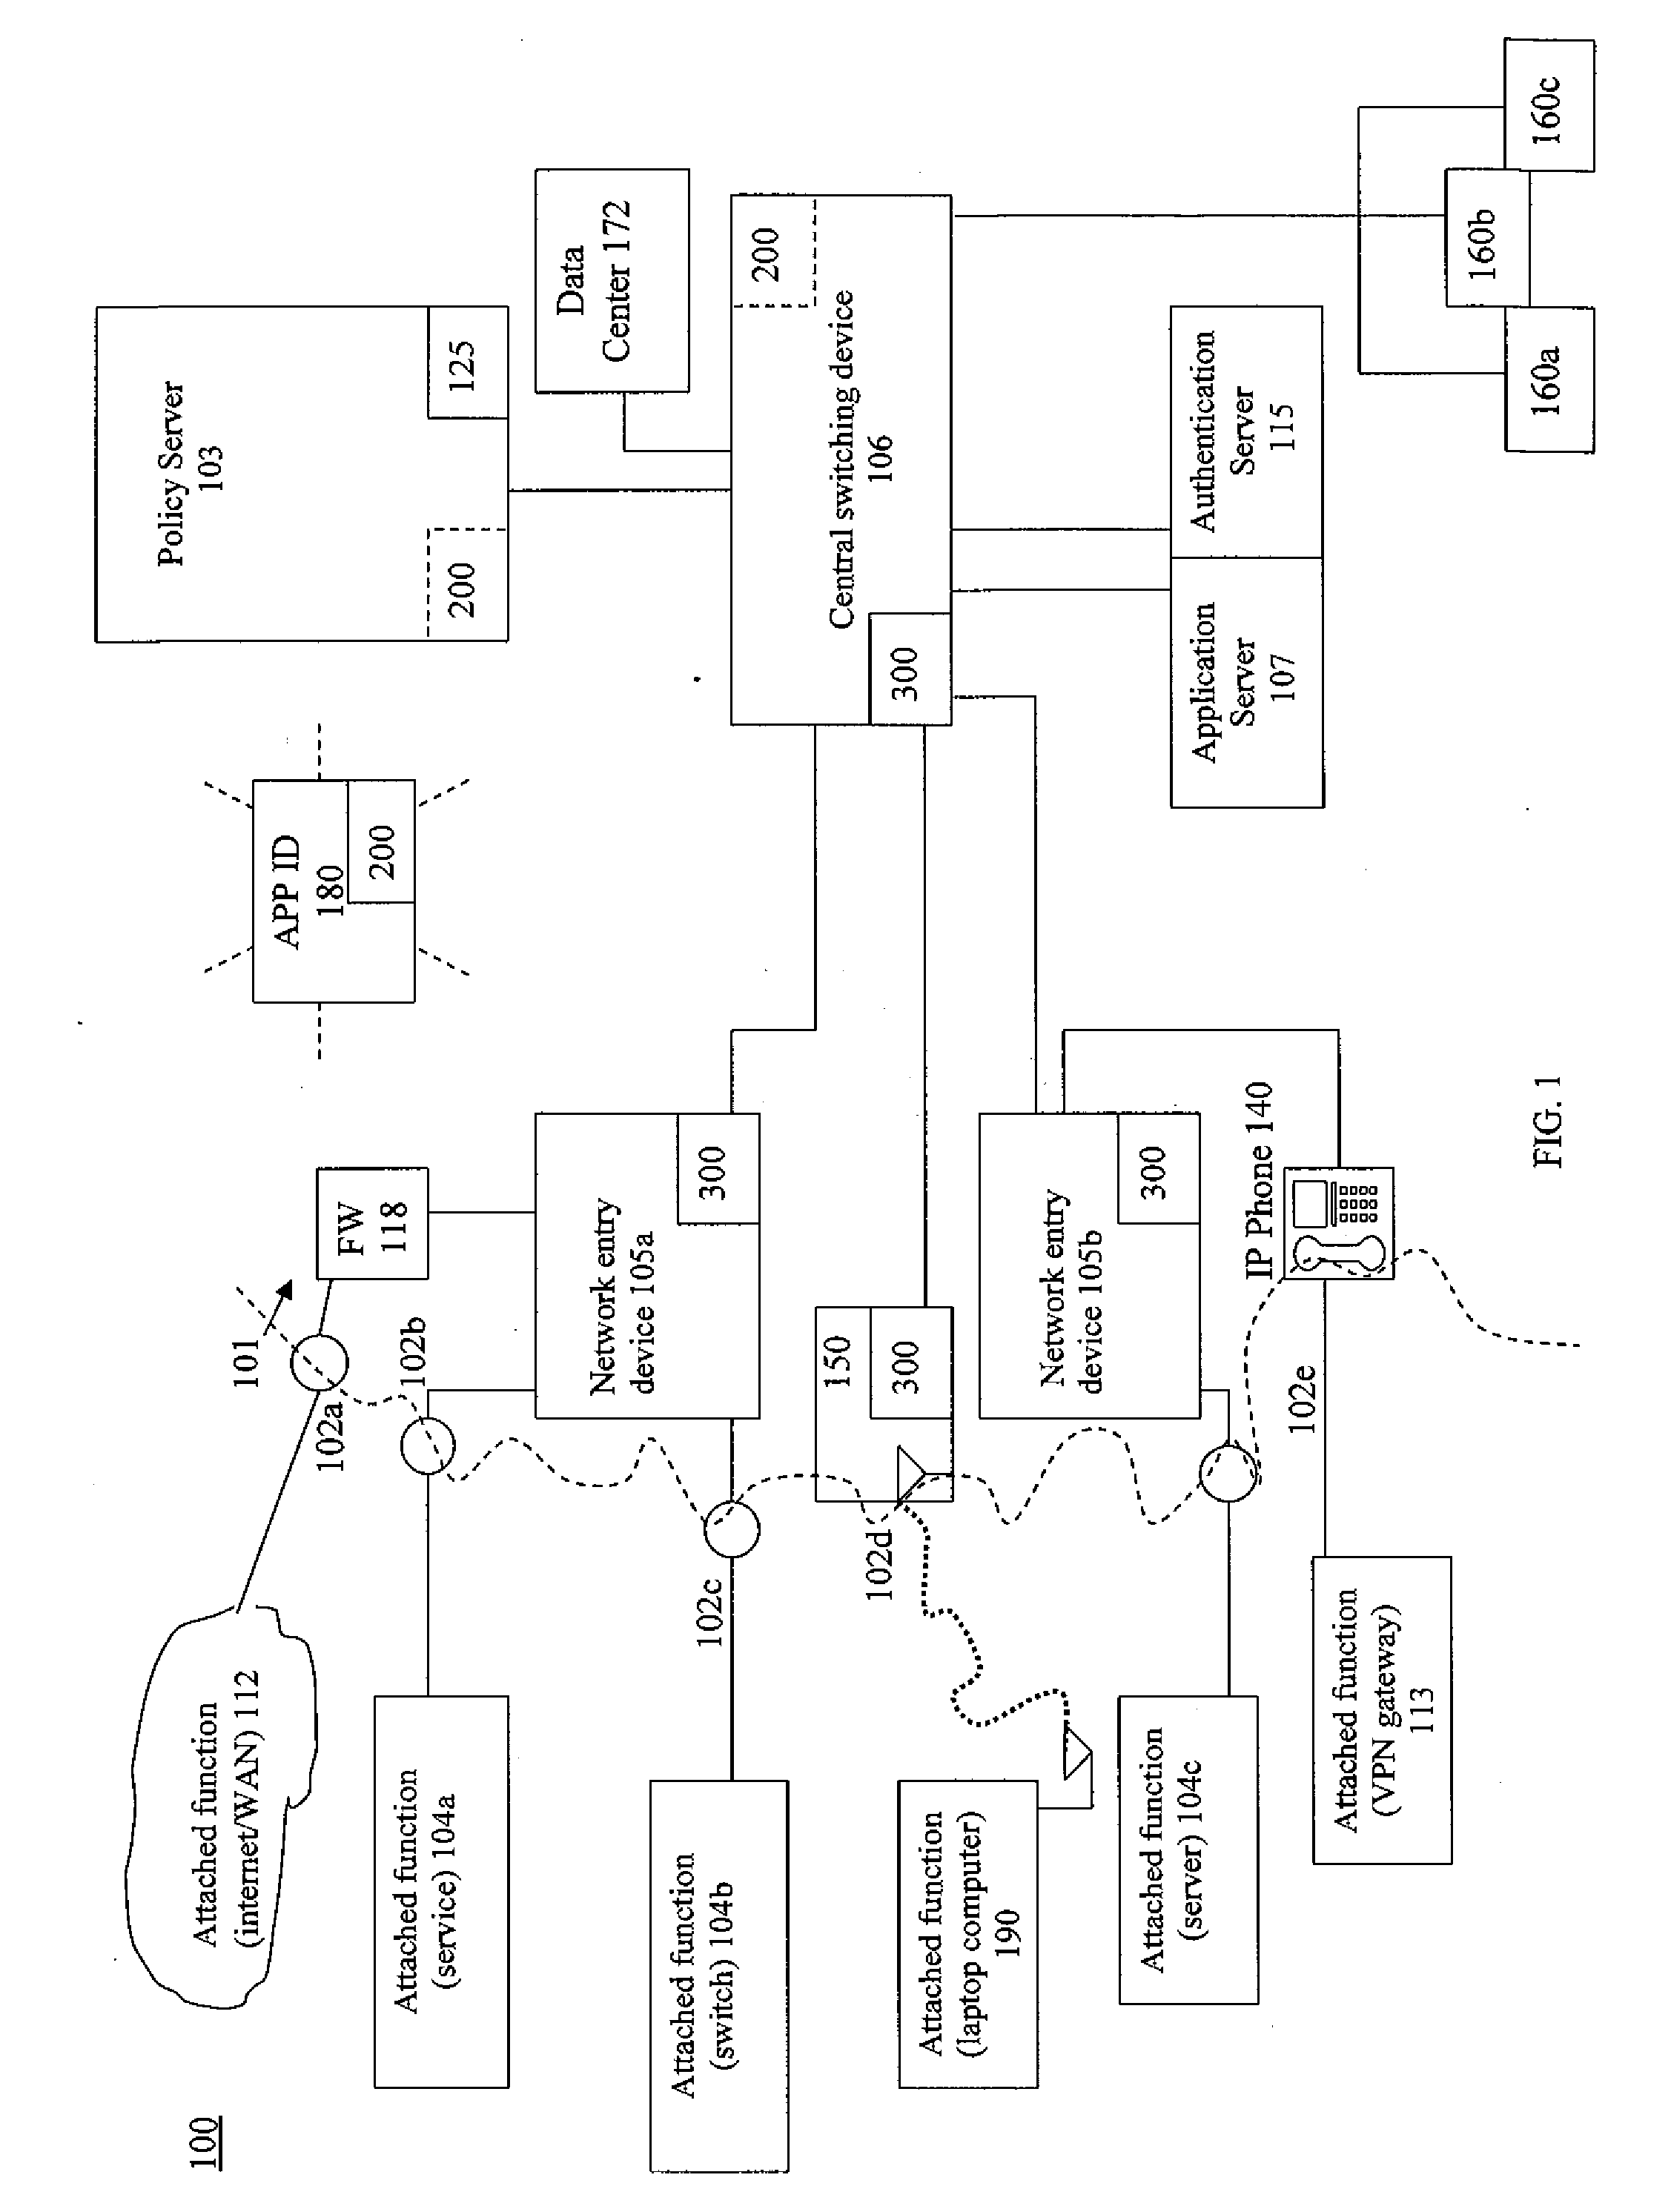 System and related method for network monitoring and control based on applications